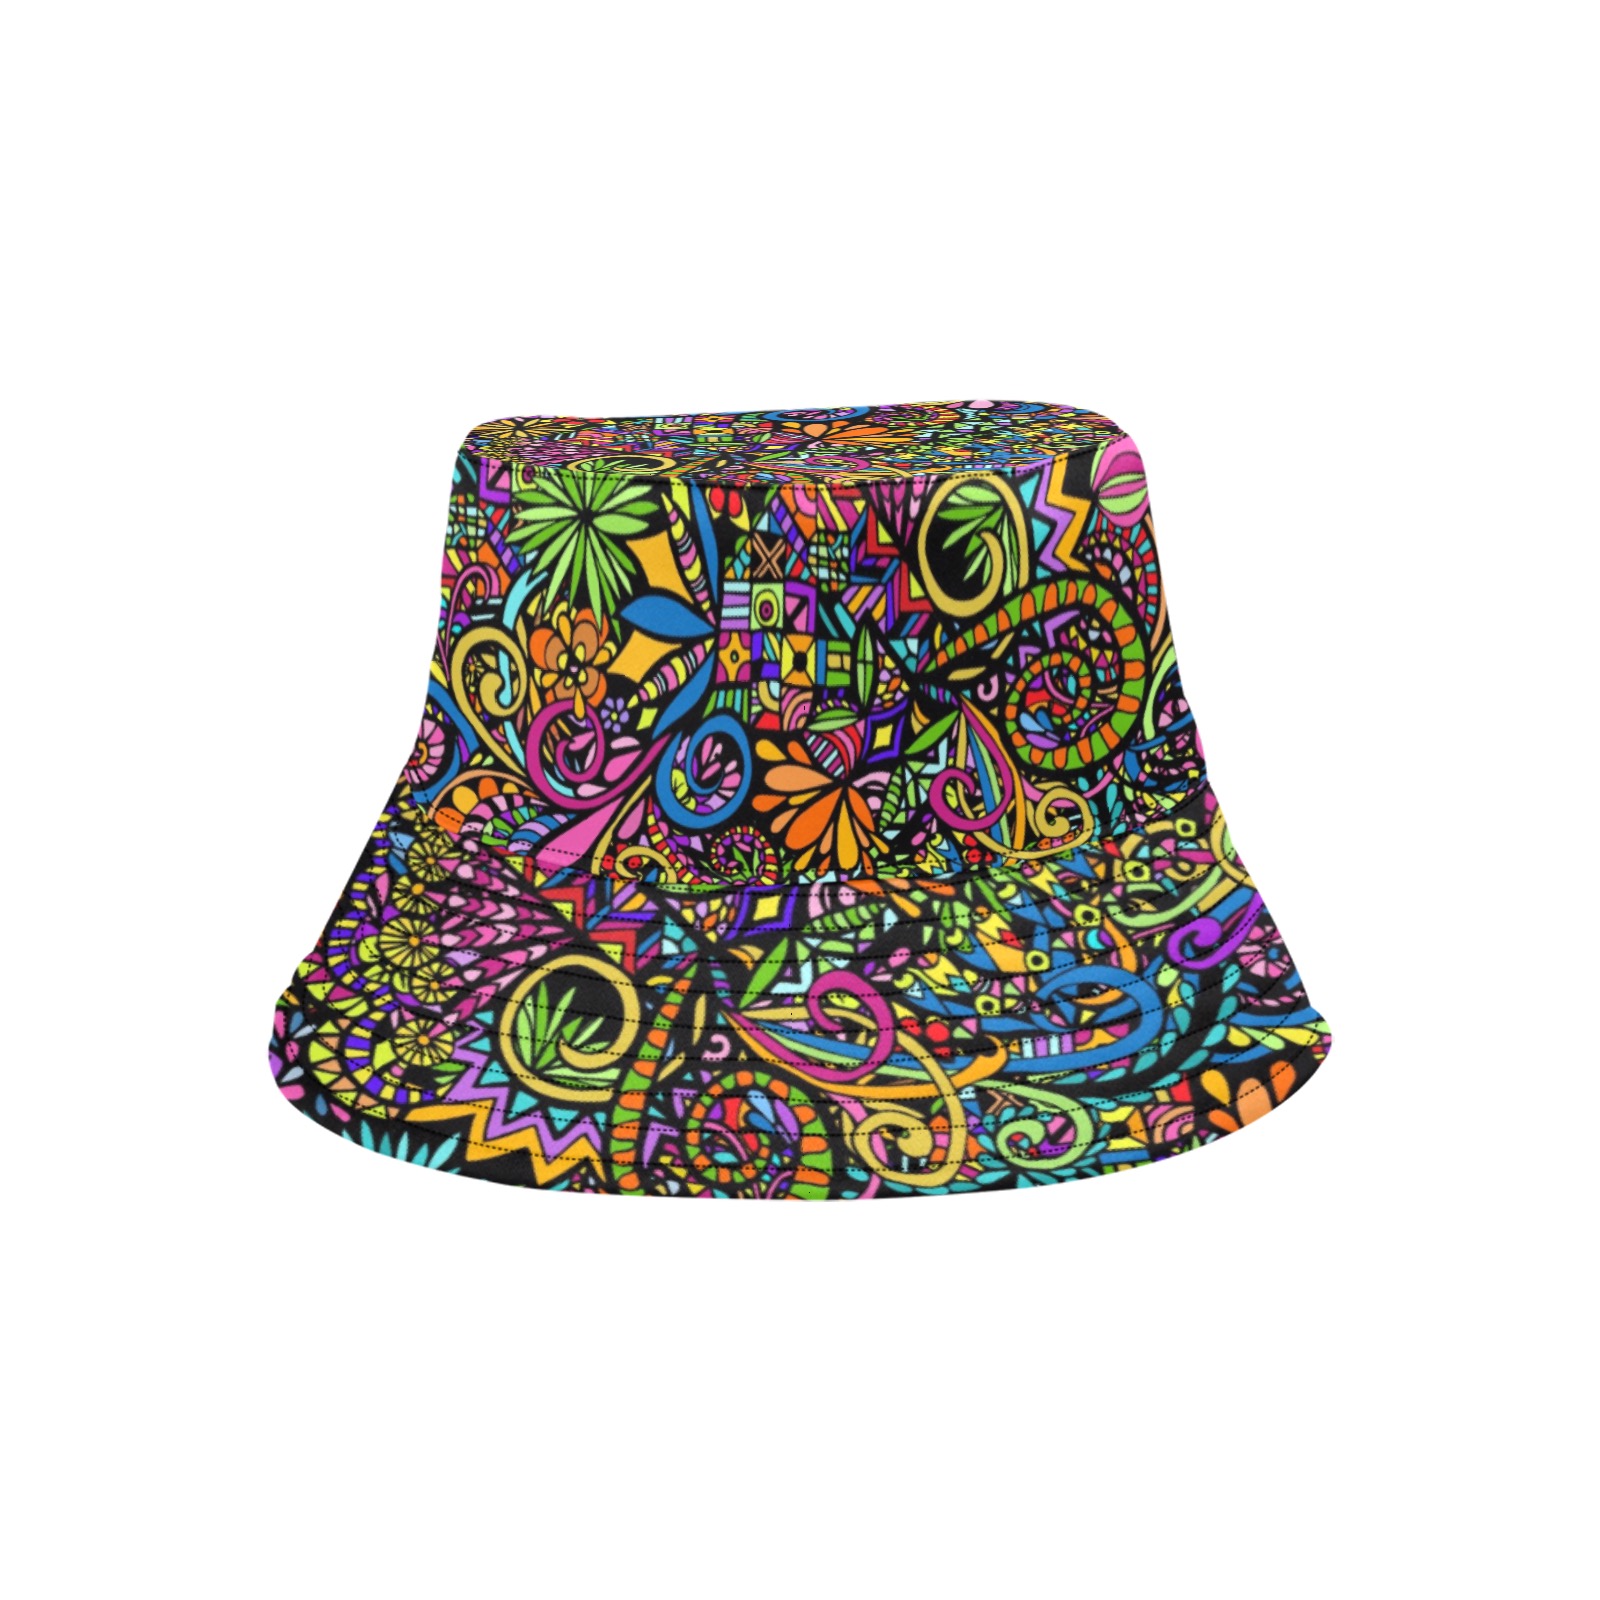 Life’s a Circus Unisex Summer Bucket Hat